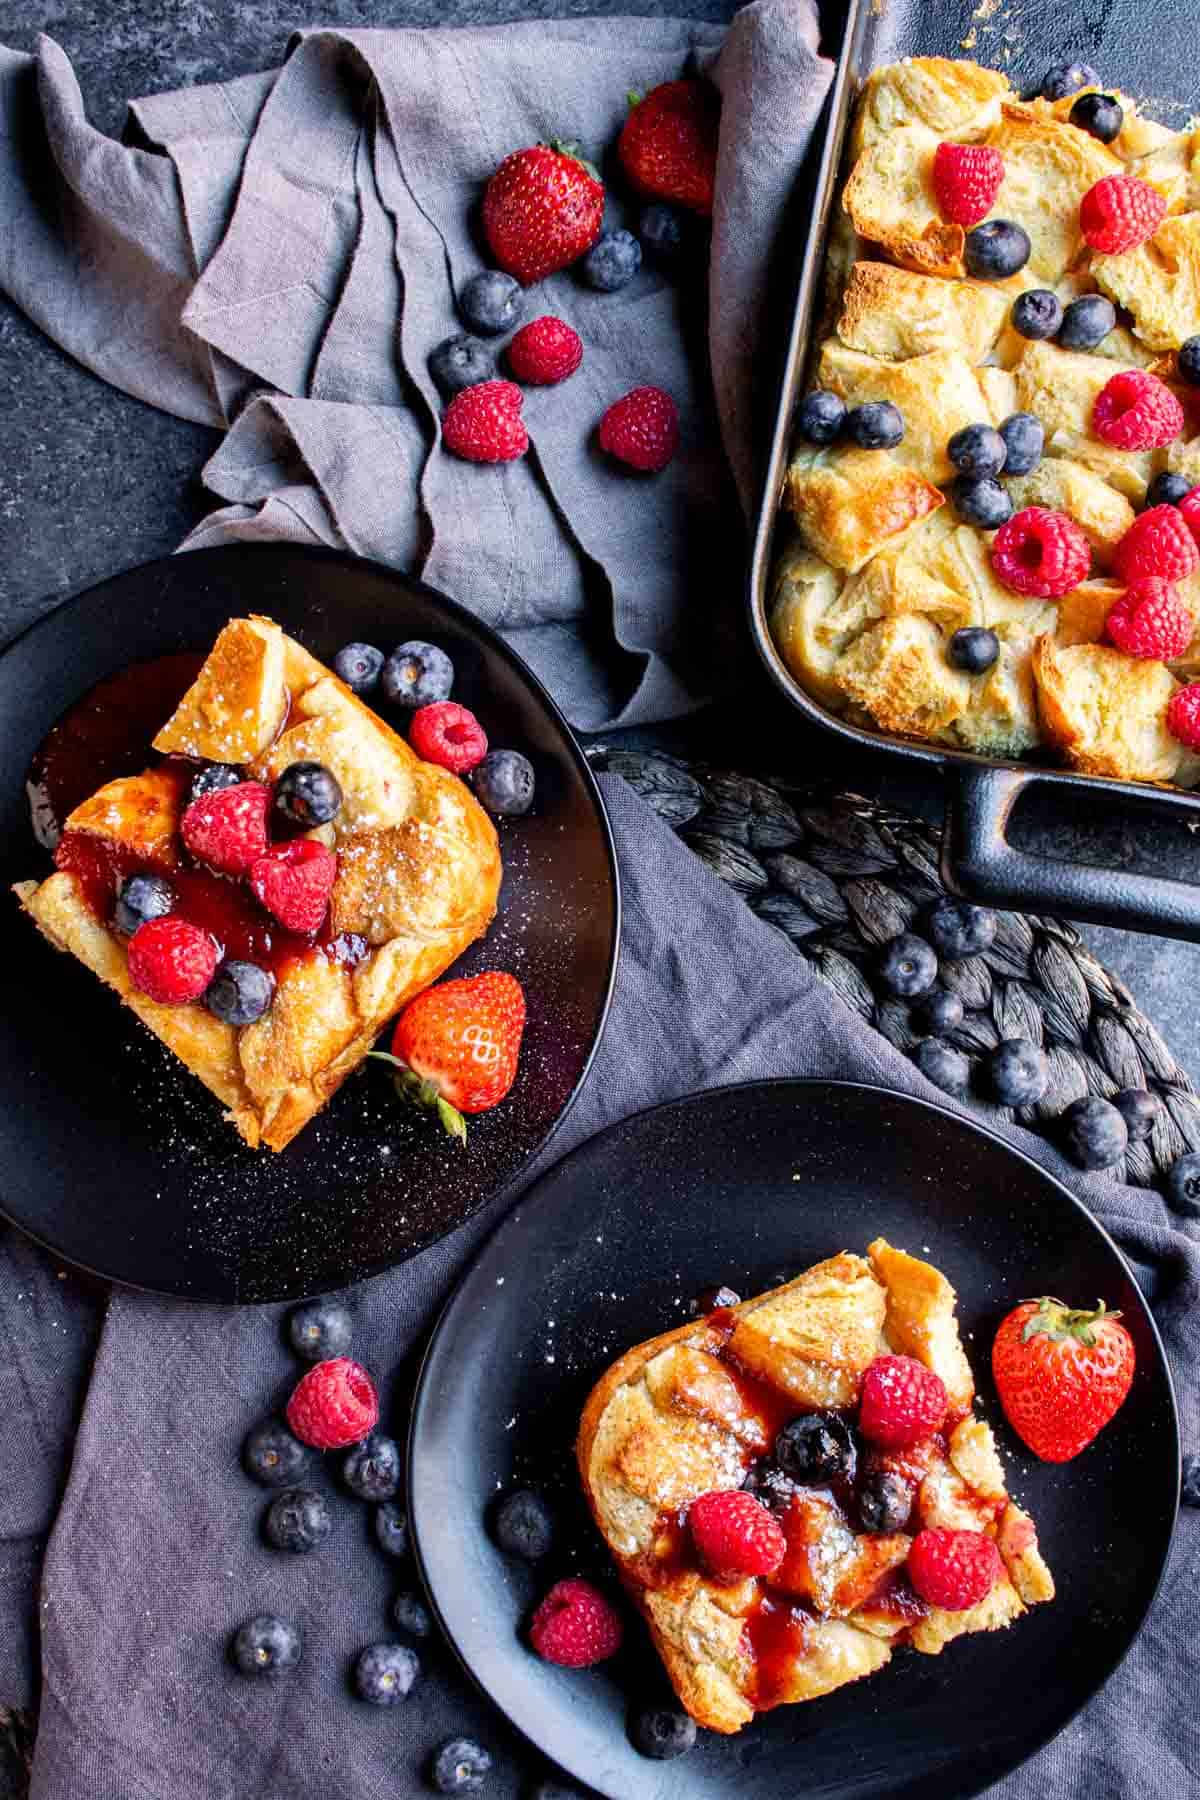 A plate of Overnight French Toast Bake with berries and raspberries.